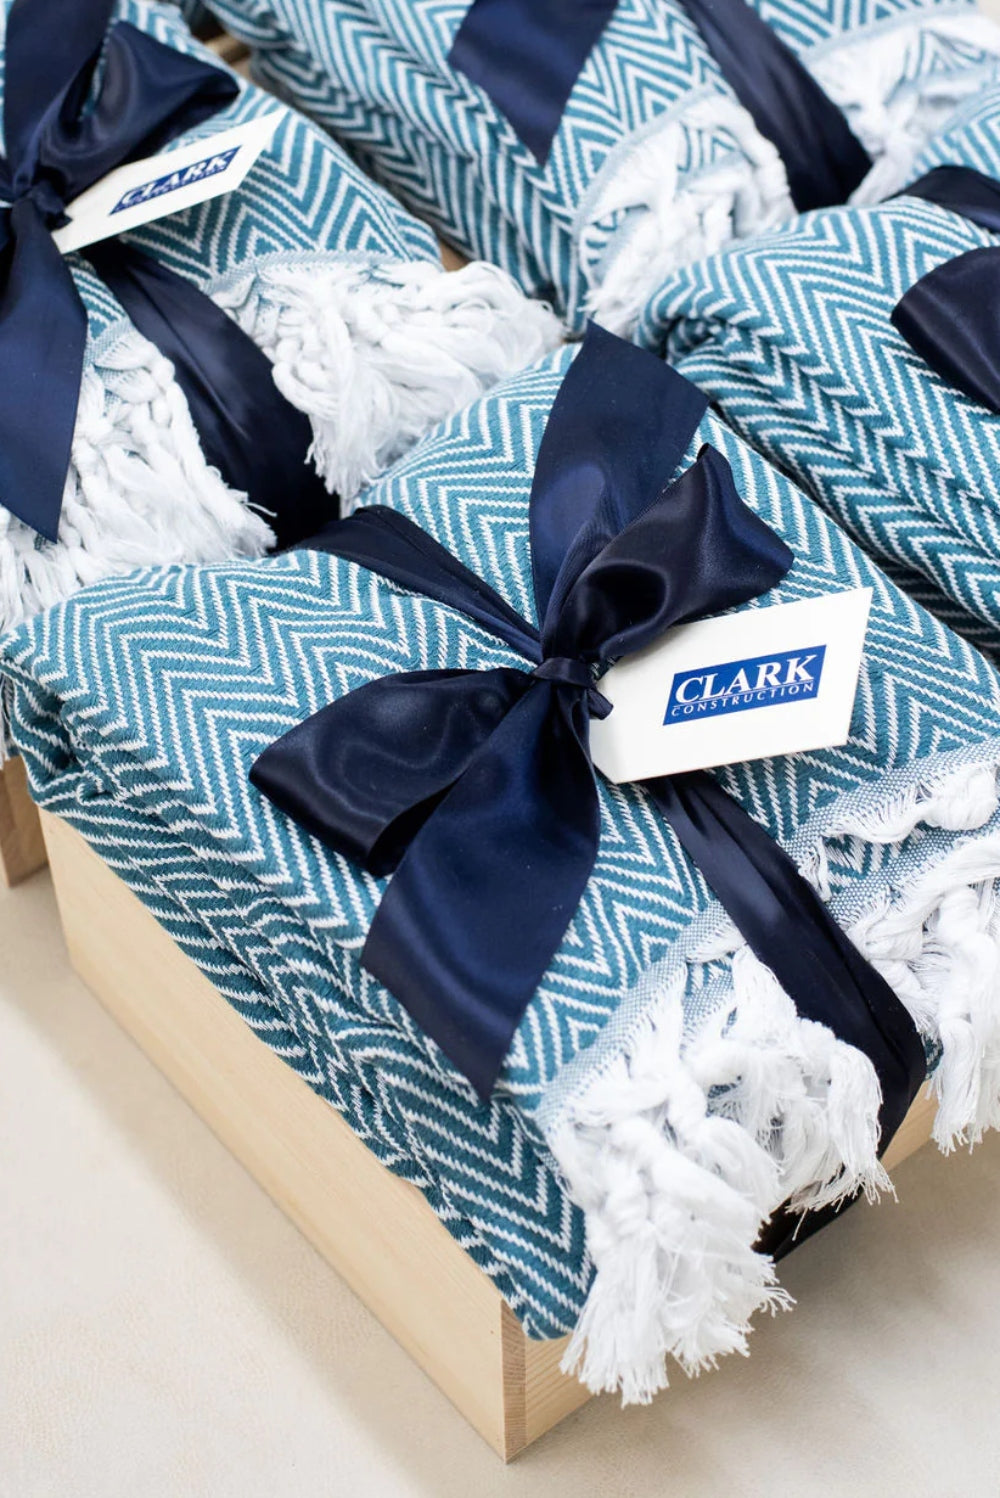 Custom Corporate Client Appreciation Holiday Gifts with Blankets, by Marigold & Grey